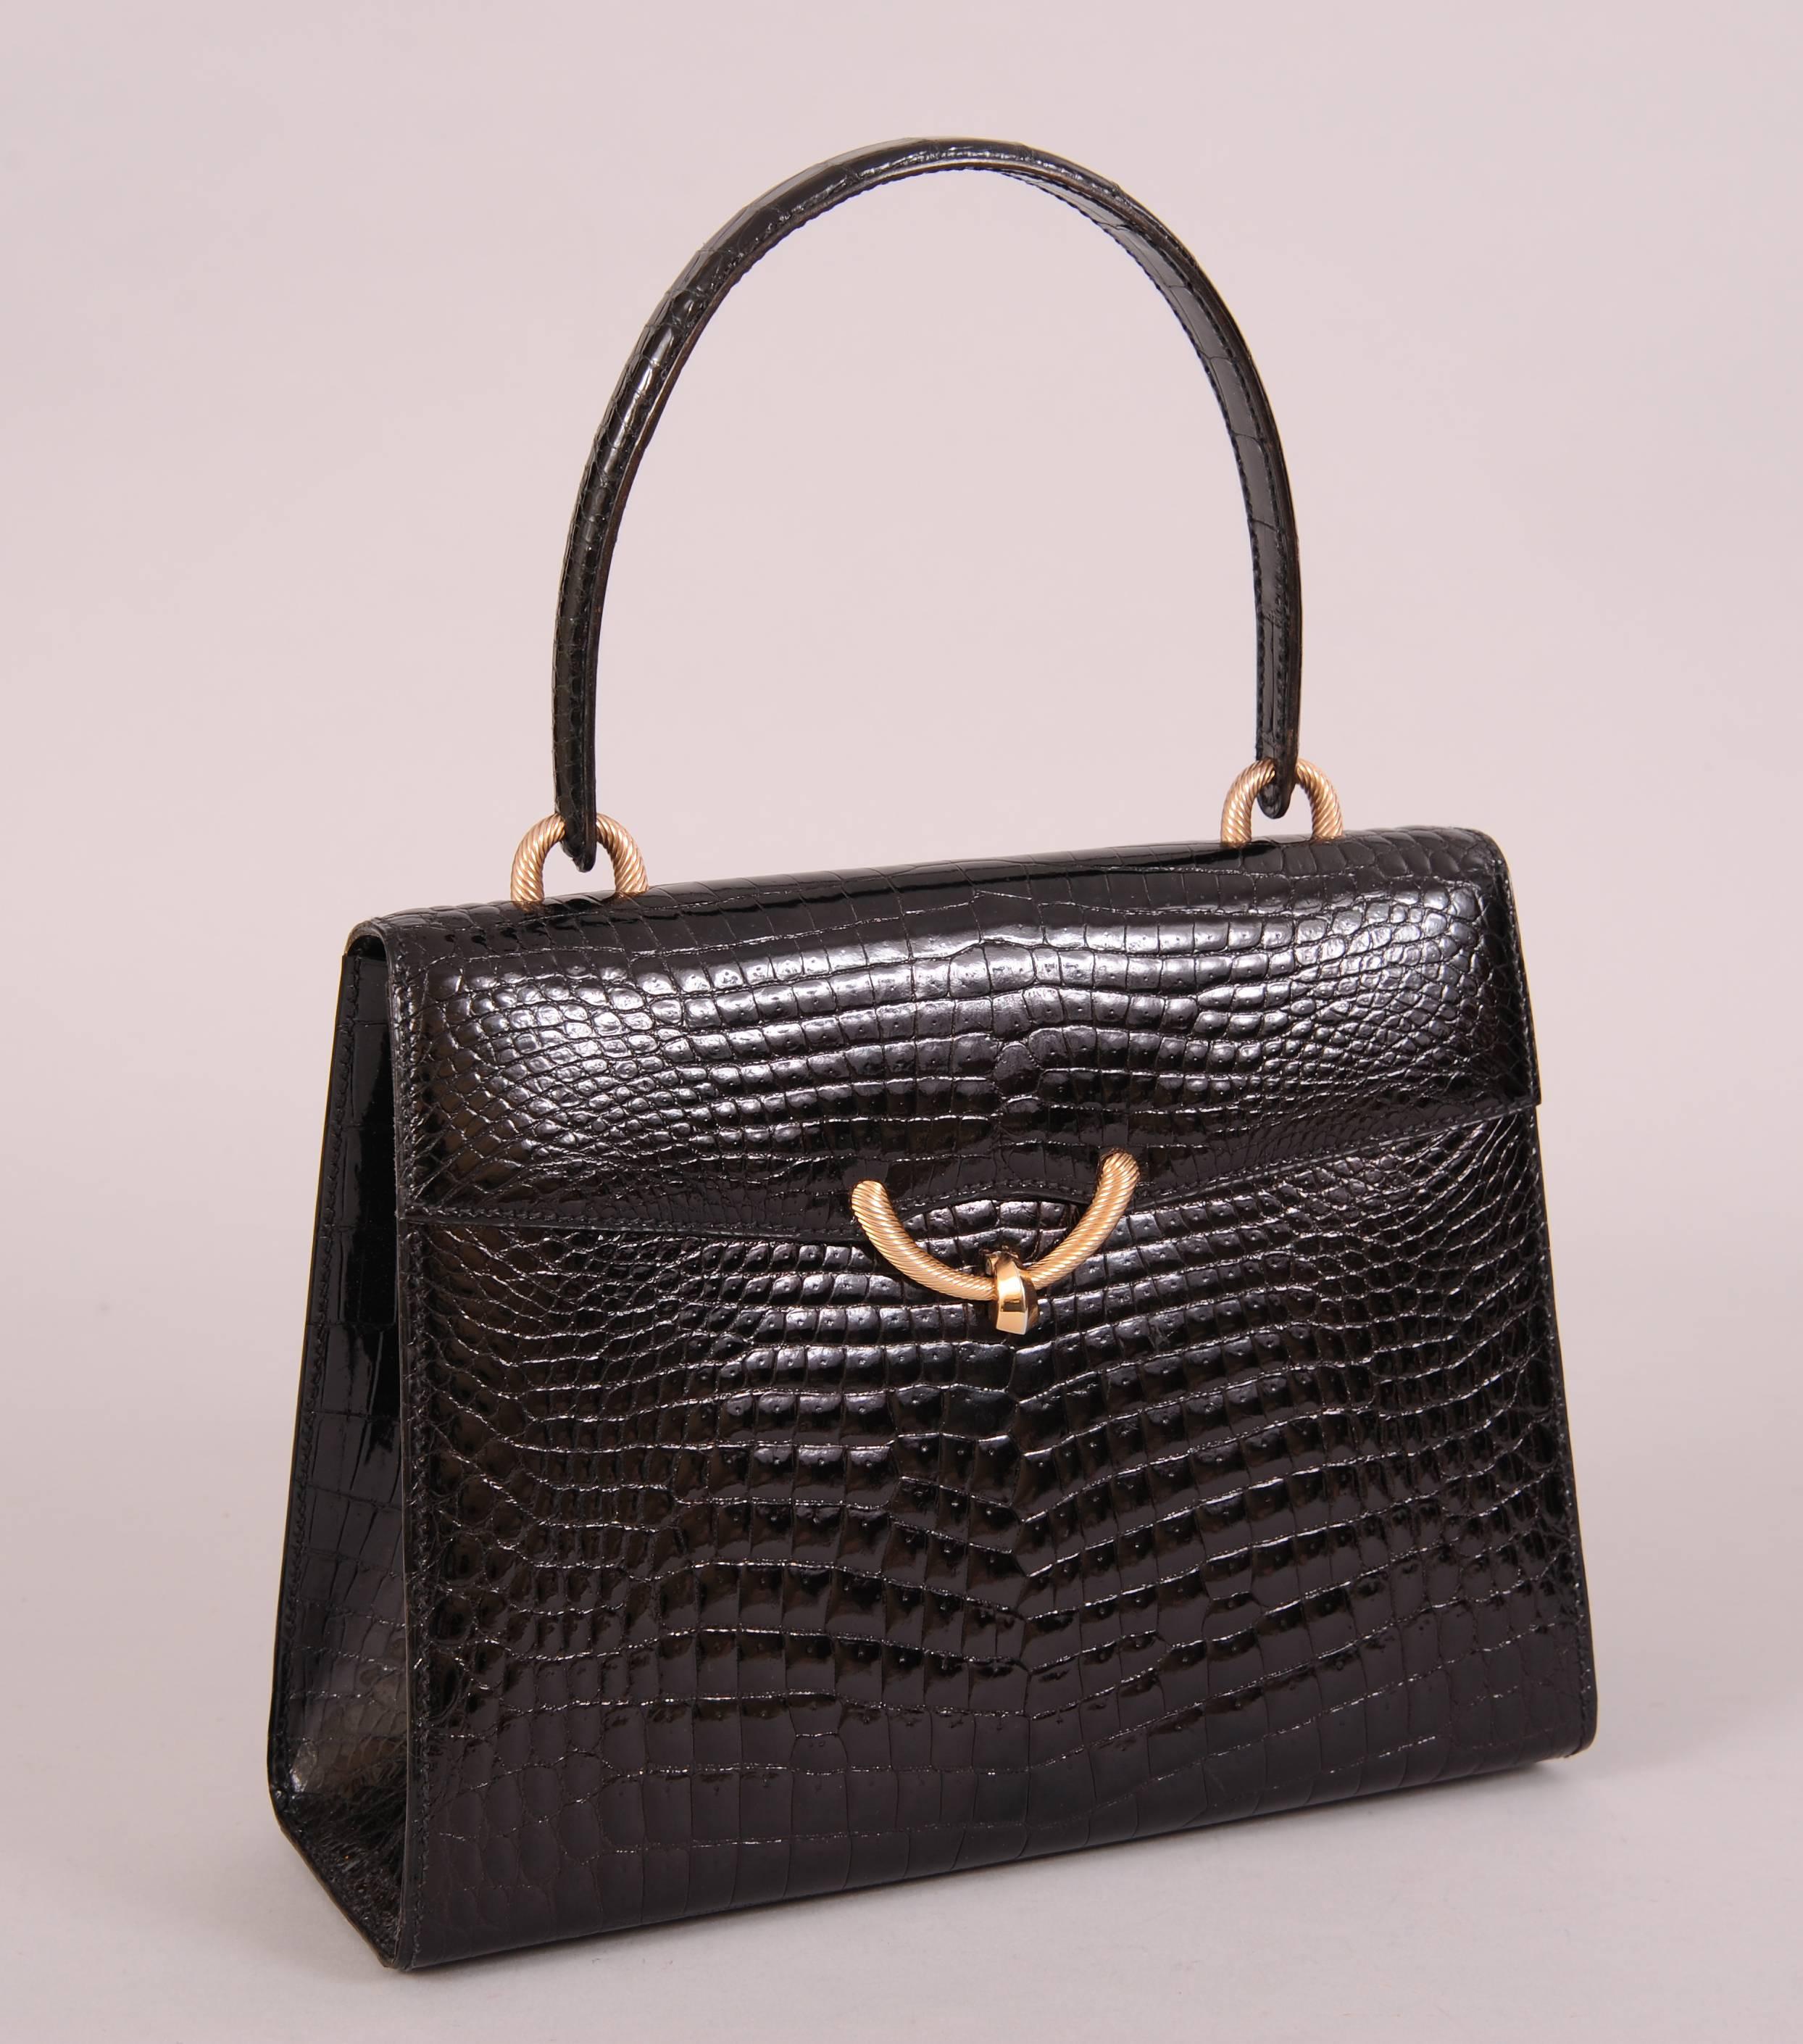 A structured black crocodile handbag with a lustrous shine is accented with gold toned hardware. There is a large slip pocket on the front of the bag concealed by the flap closure. There are two more slip pockets, a zippered pocket and a metal